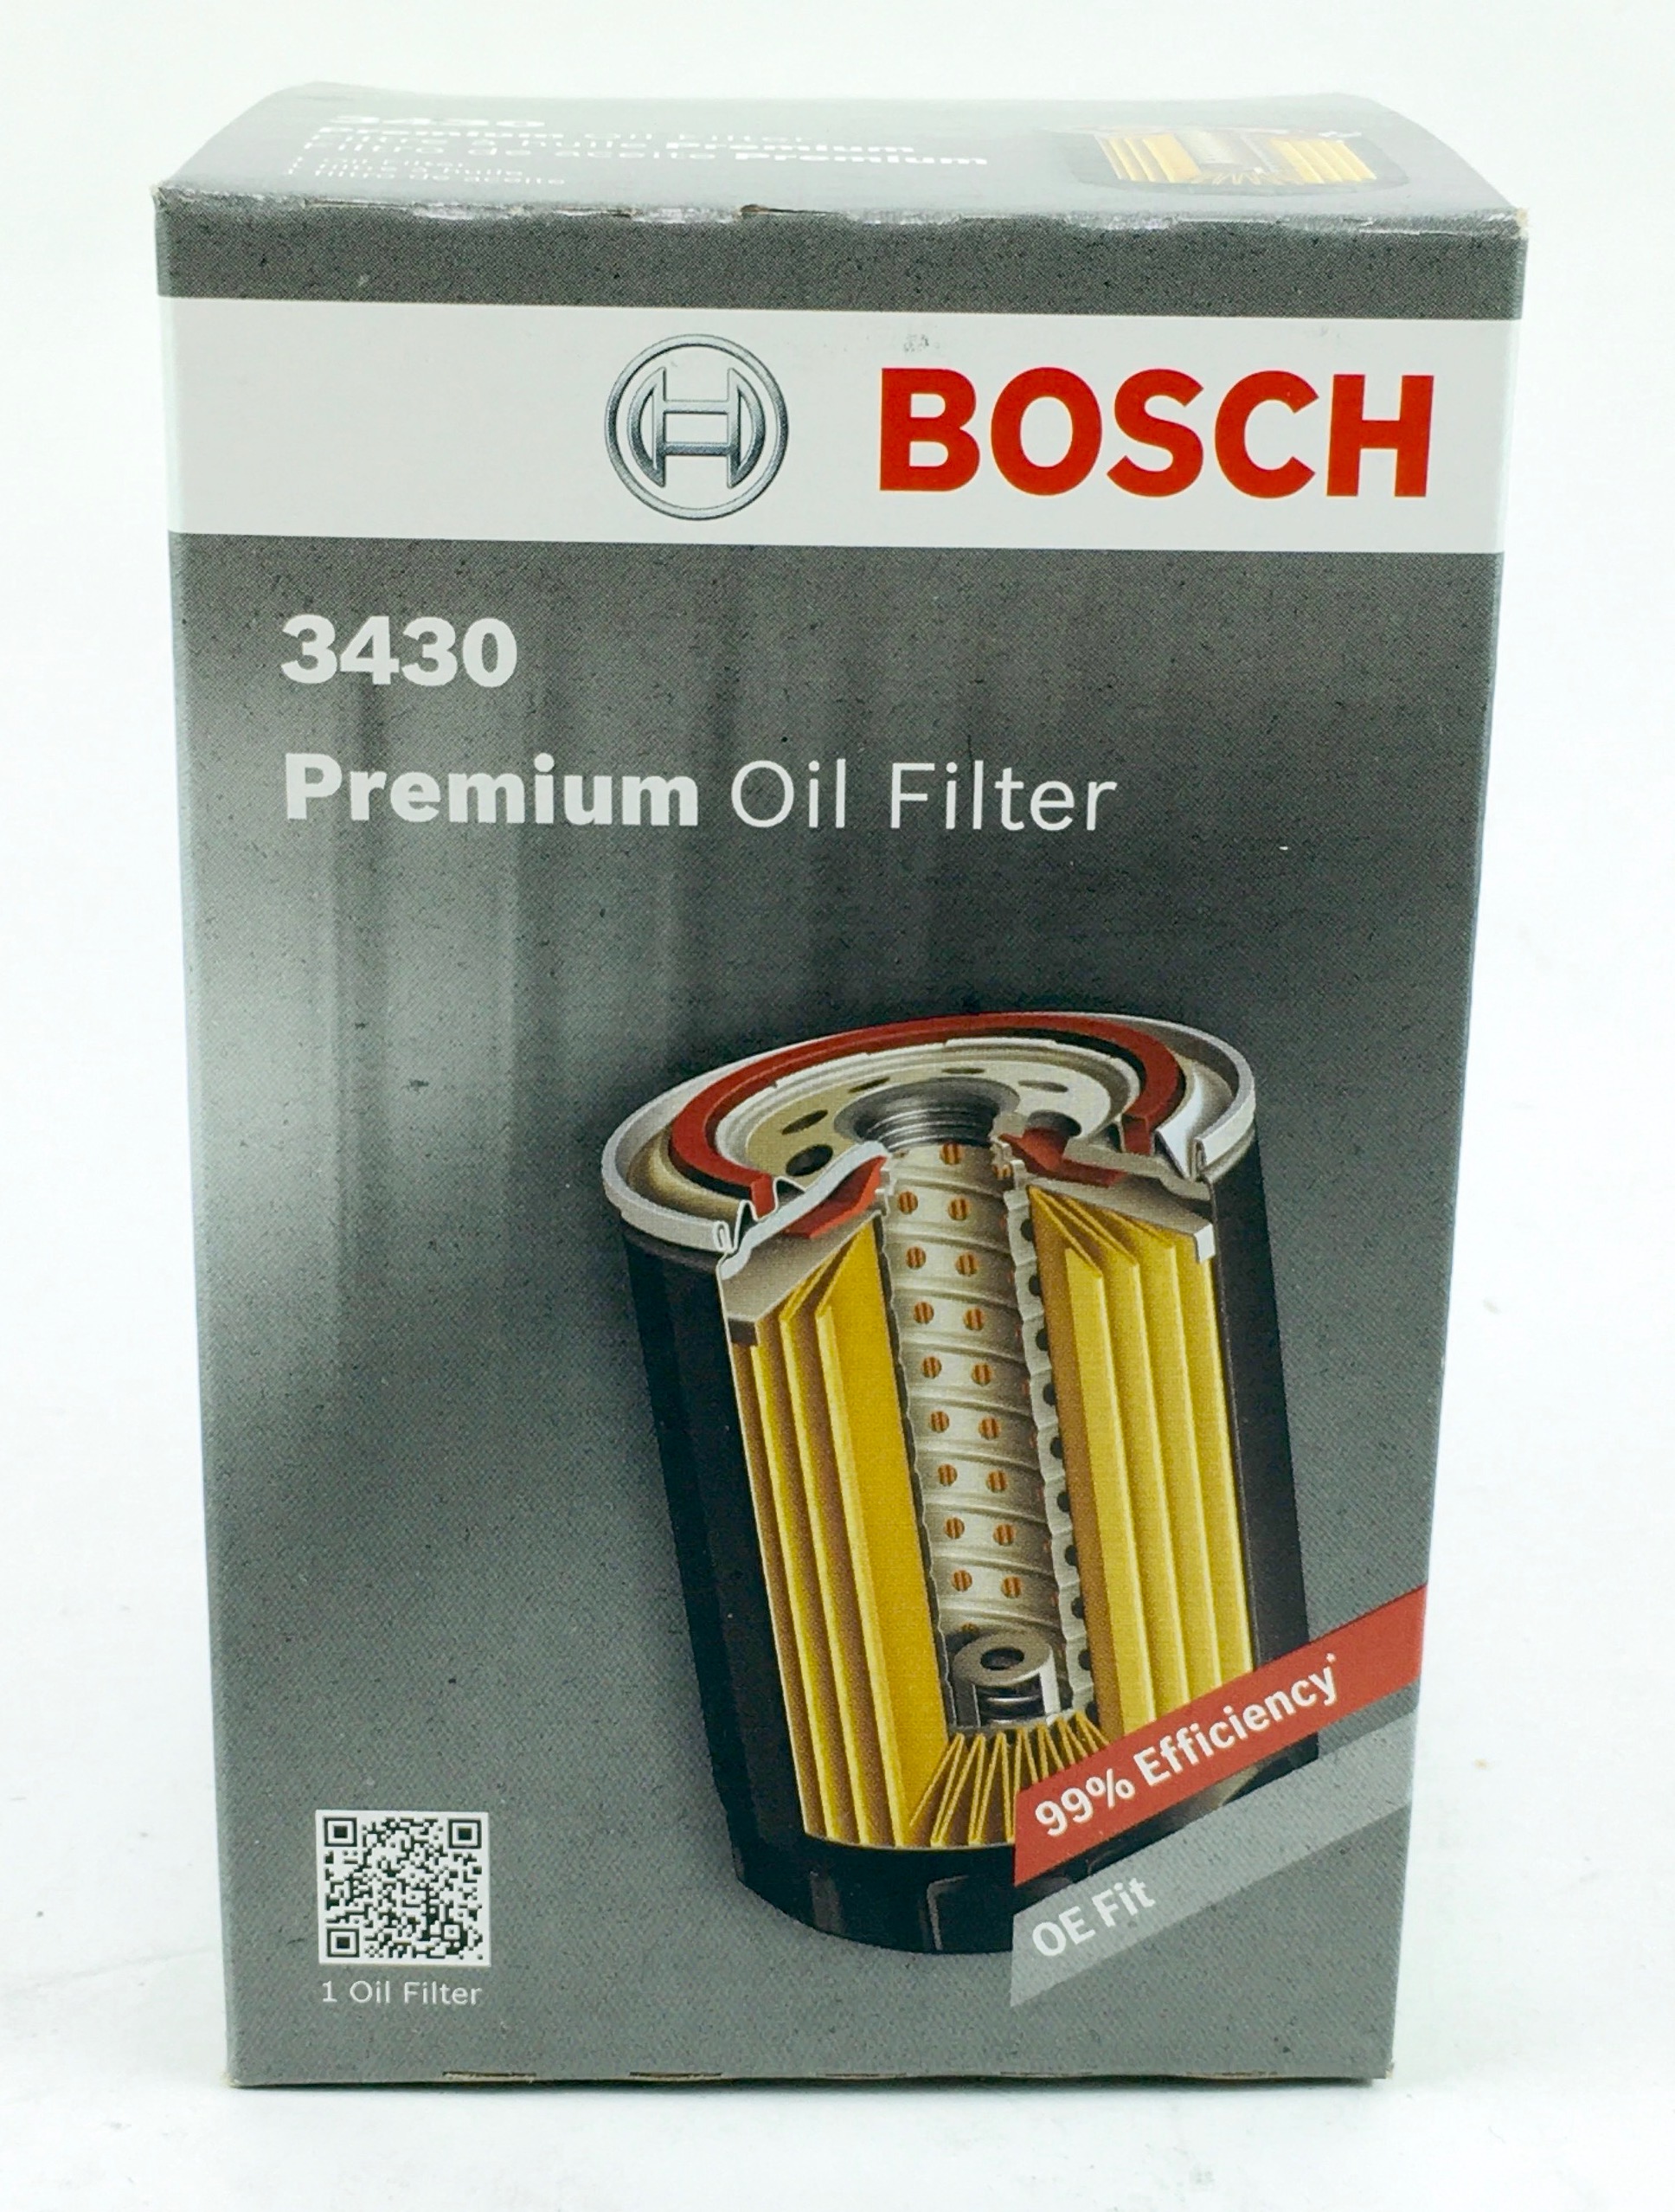 Lot of 4 New Genuine Bosch 3430 Premium Spin-On Engine Oil Filters Free Shipping - image 3